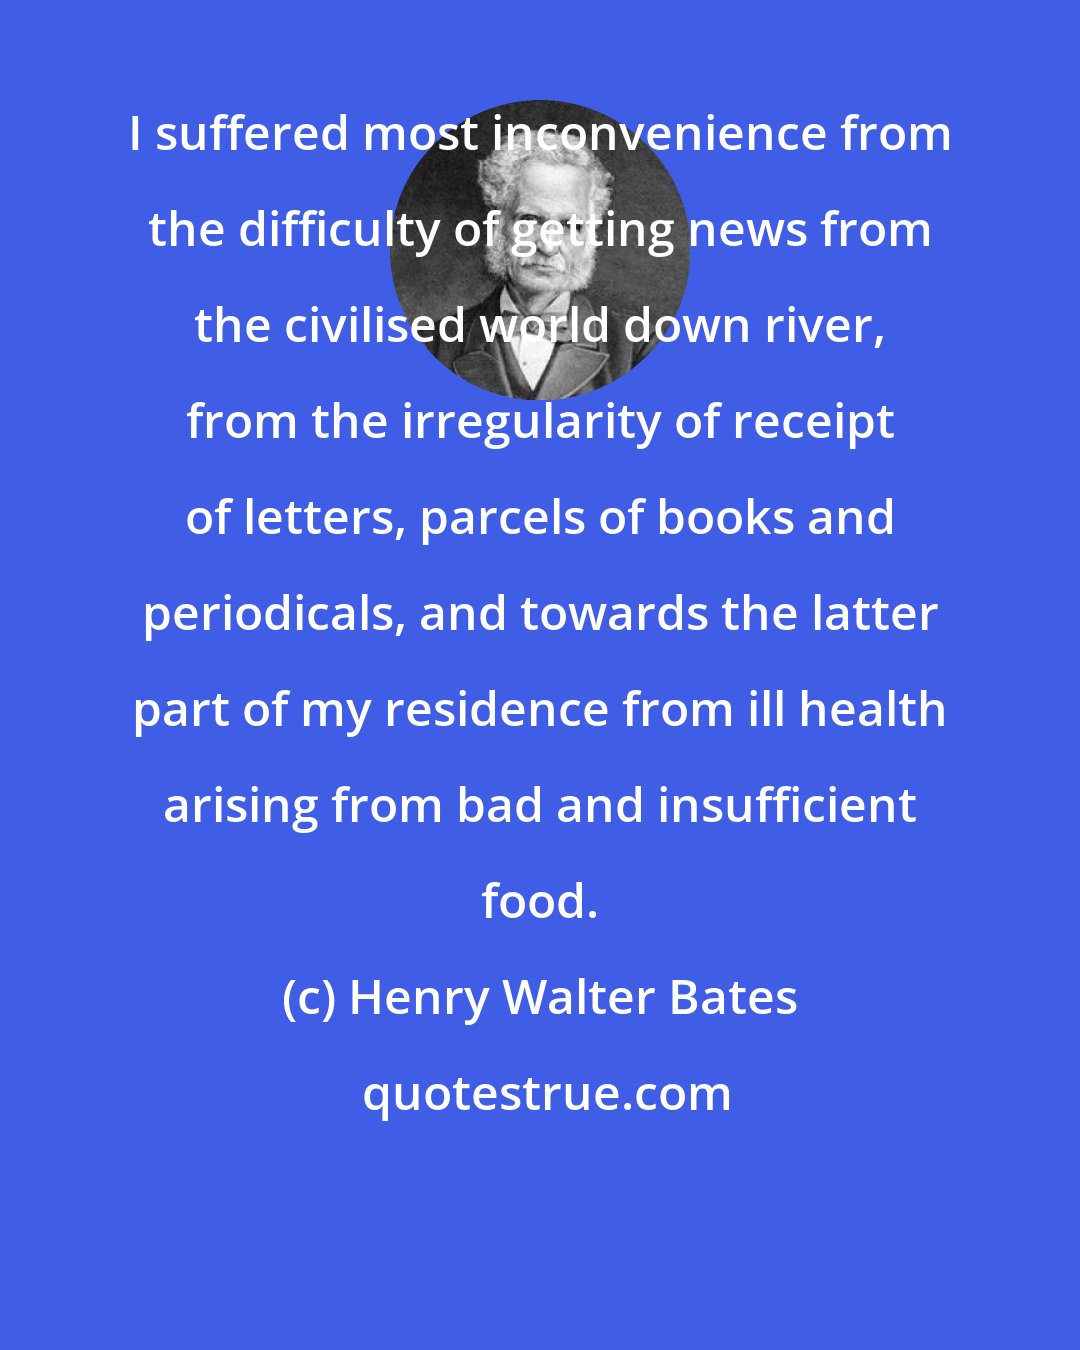 Henry Walter Bates: I suffered most inconvenience from the difficulty of getting news from the civilised world down river, from the irregularity of receipt of letters, parcels of books and periodicals, and towards the latter part of my residence from ill health arising from bad and insufficient food.